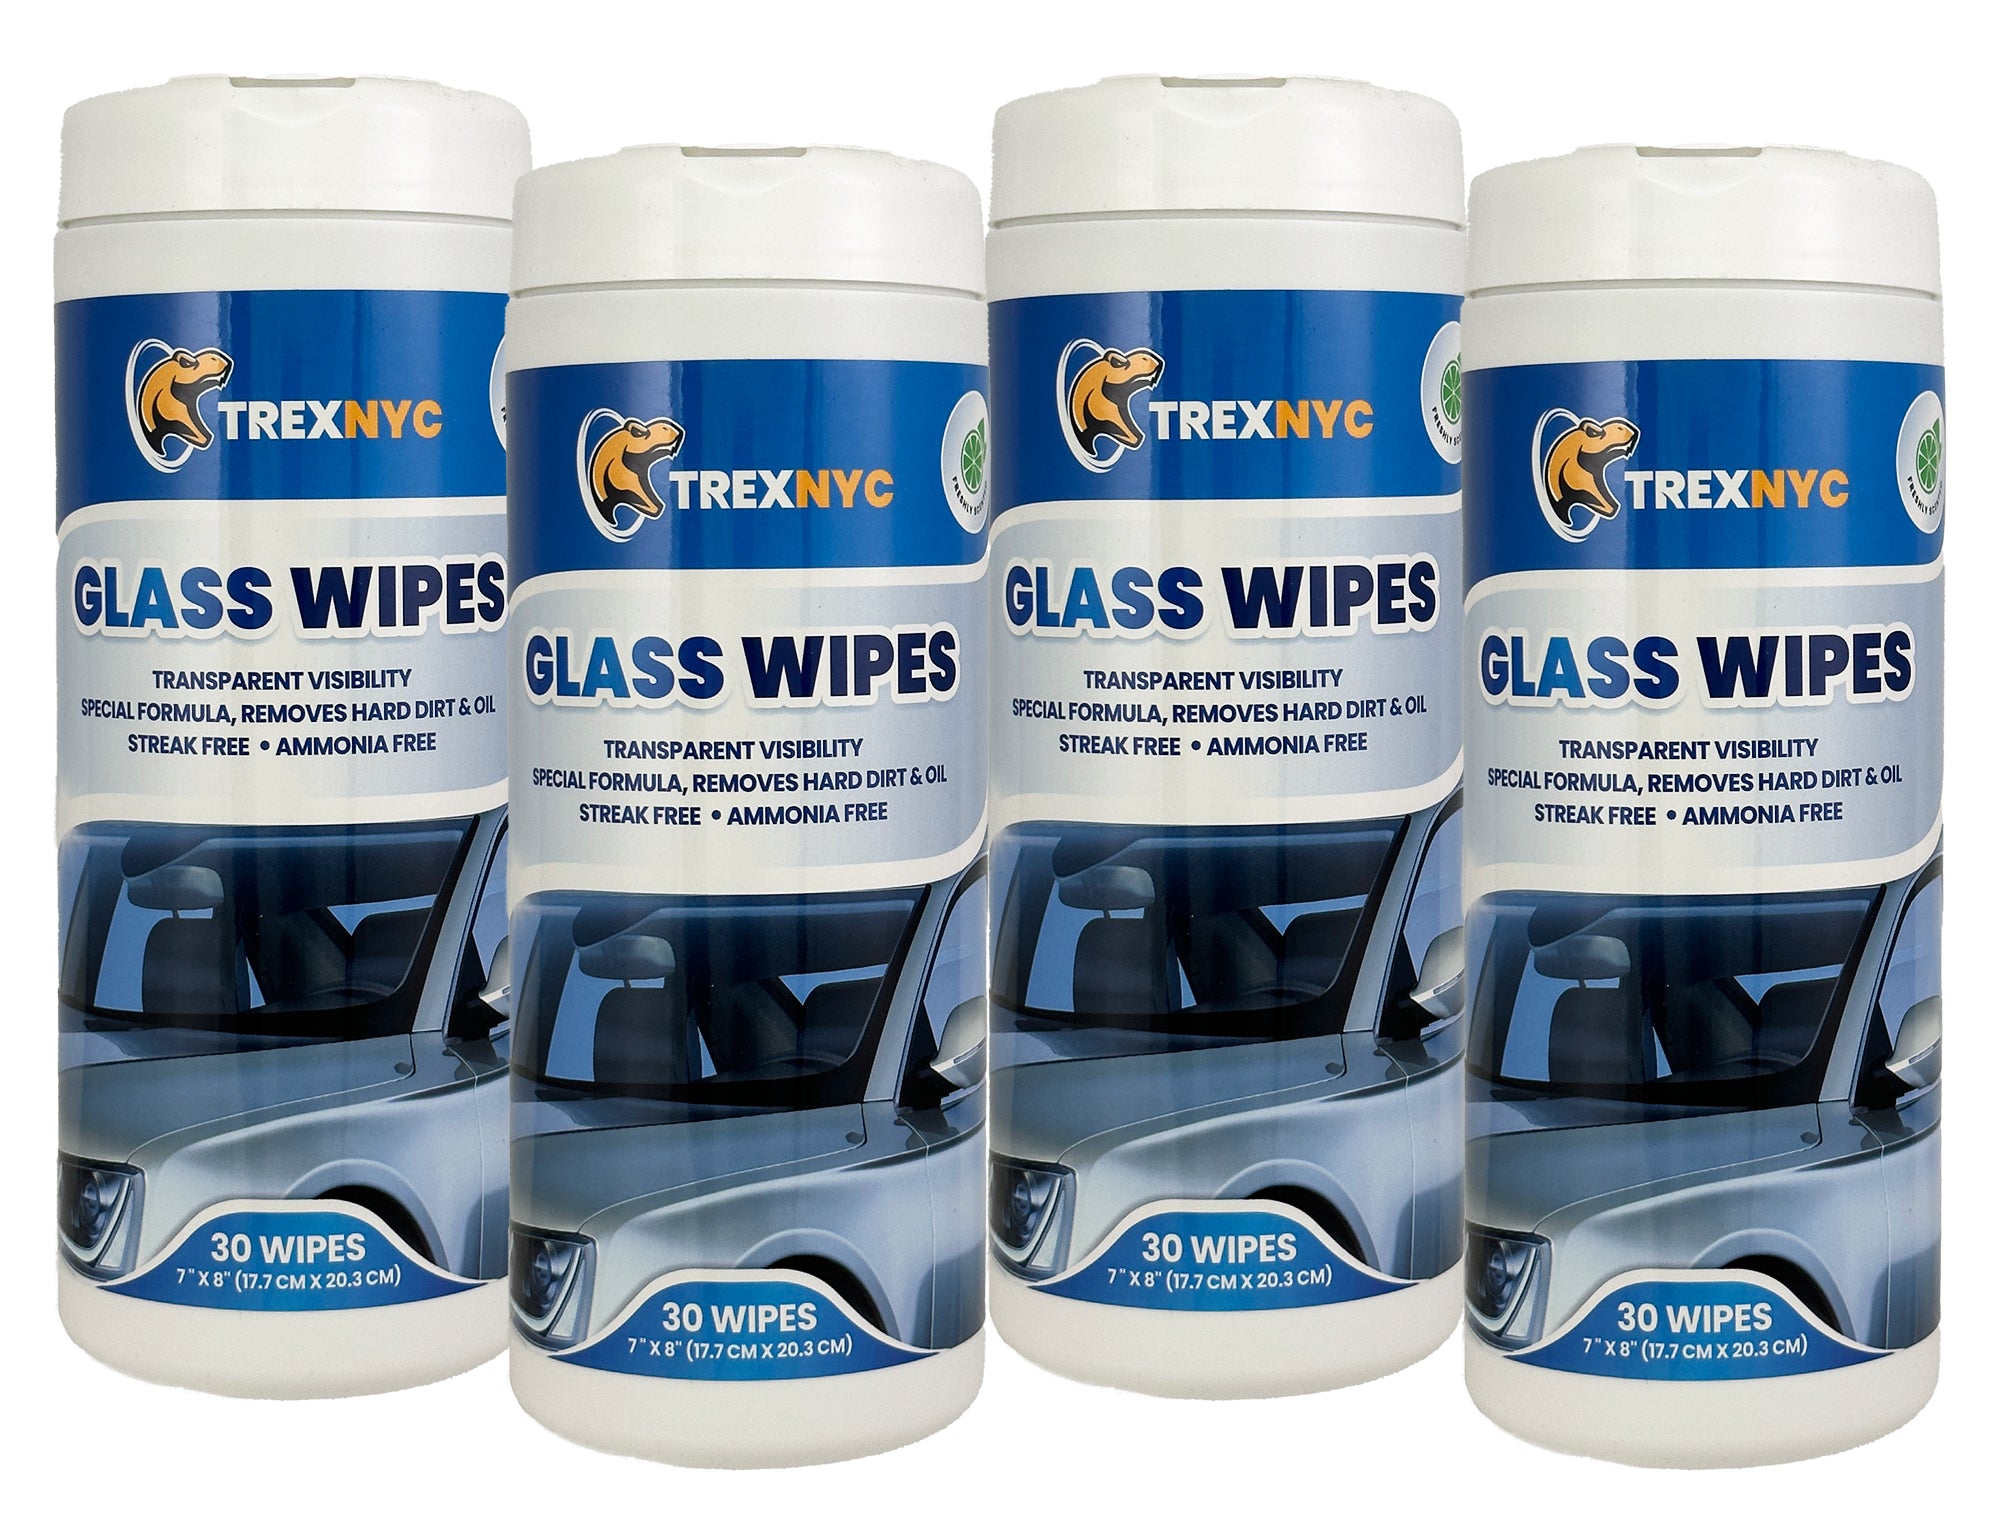 TrexNYC Glass Wipes - Interior Car Wipes, All-In-One Car Wipes & Interior  Cleaner - Powerful, Convenient, and E Effective Solution for All Your Car